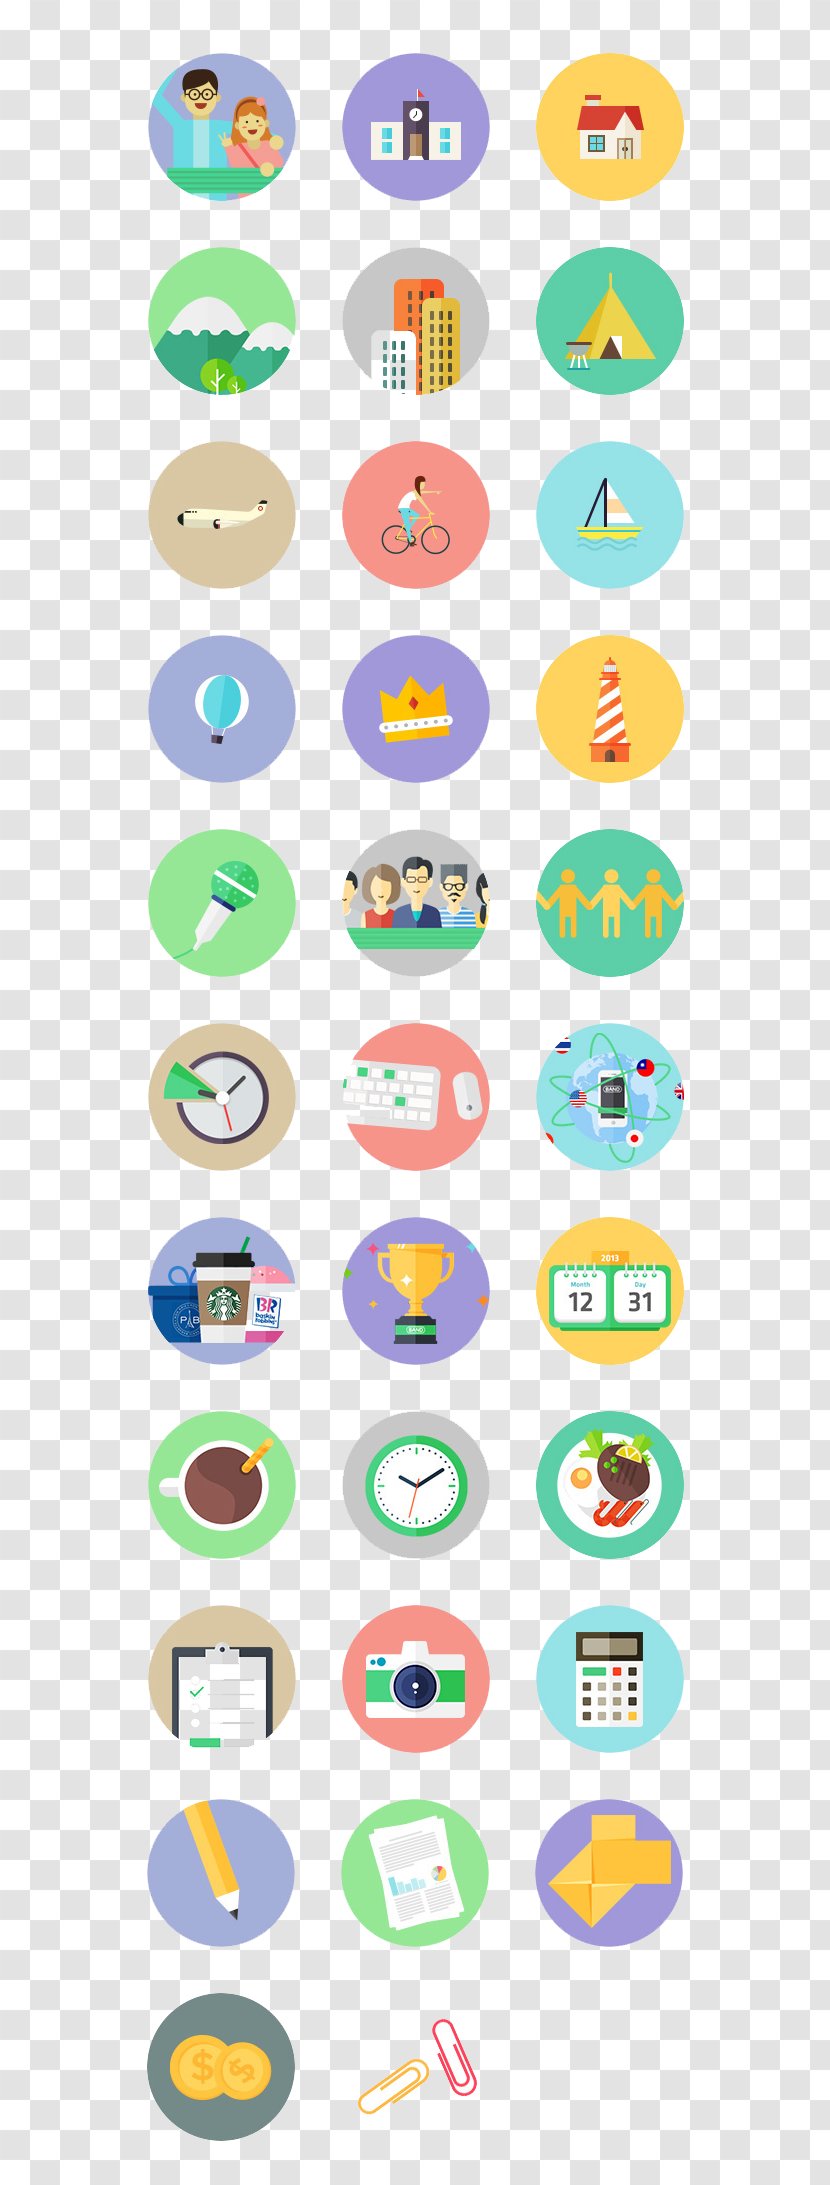 Web Design Icon - Flat Collection Transparent PNG